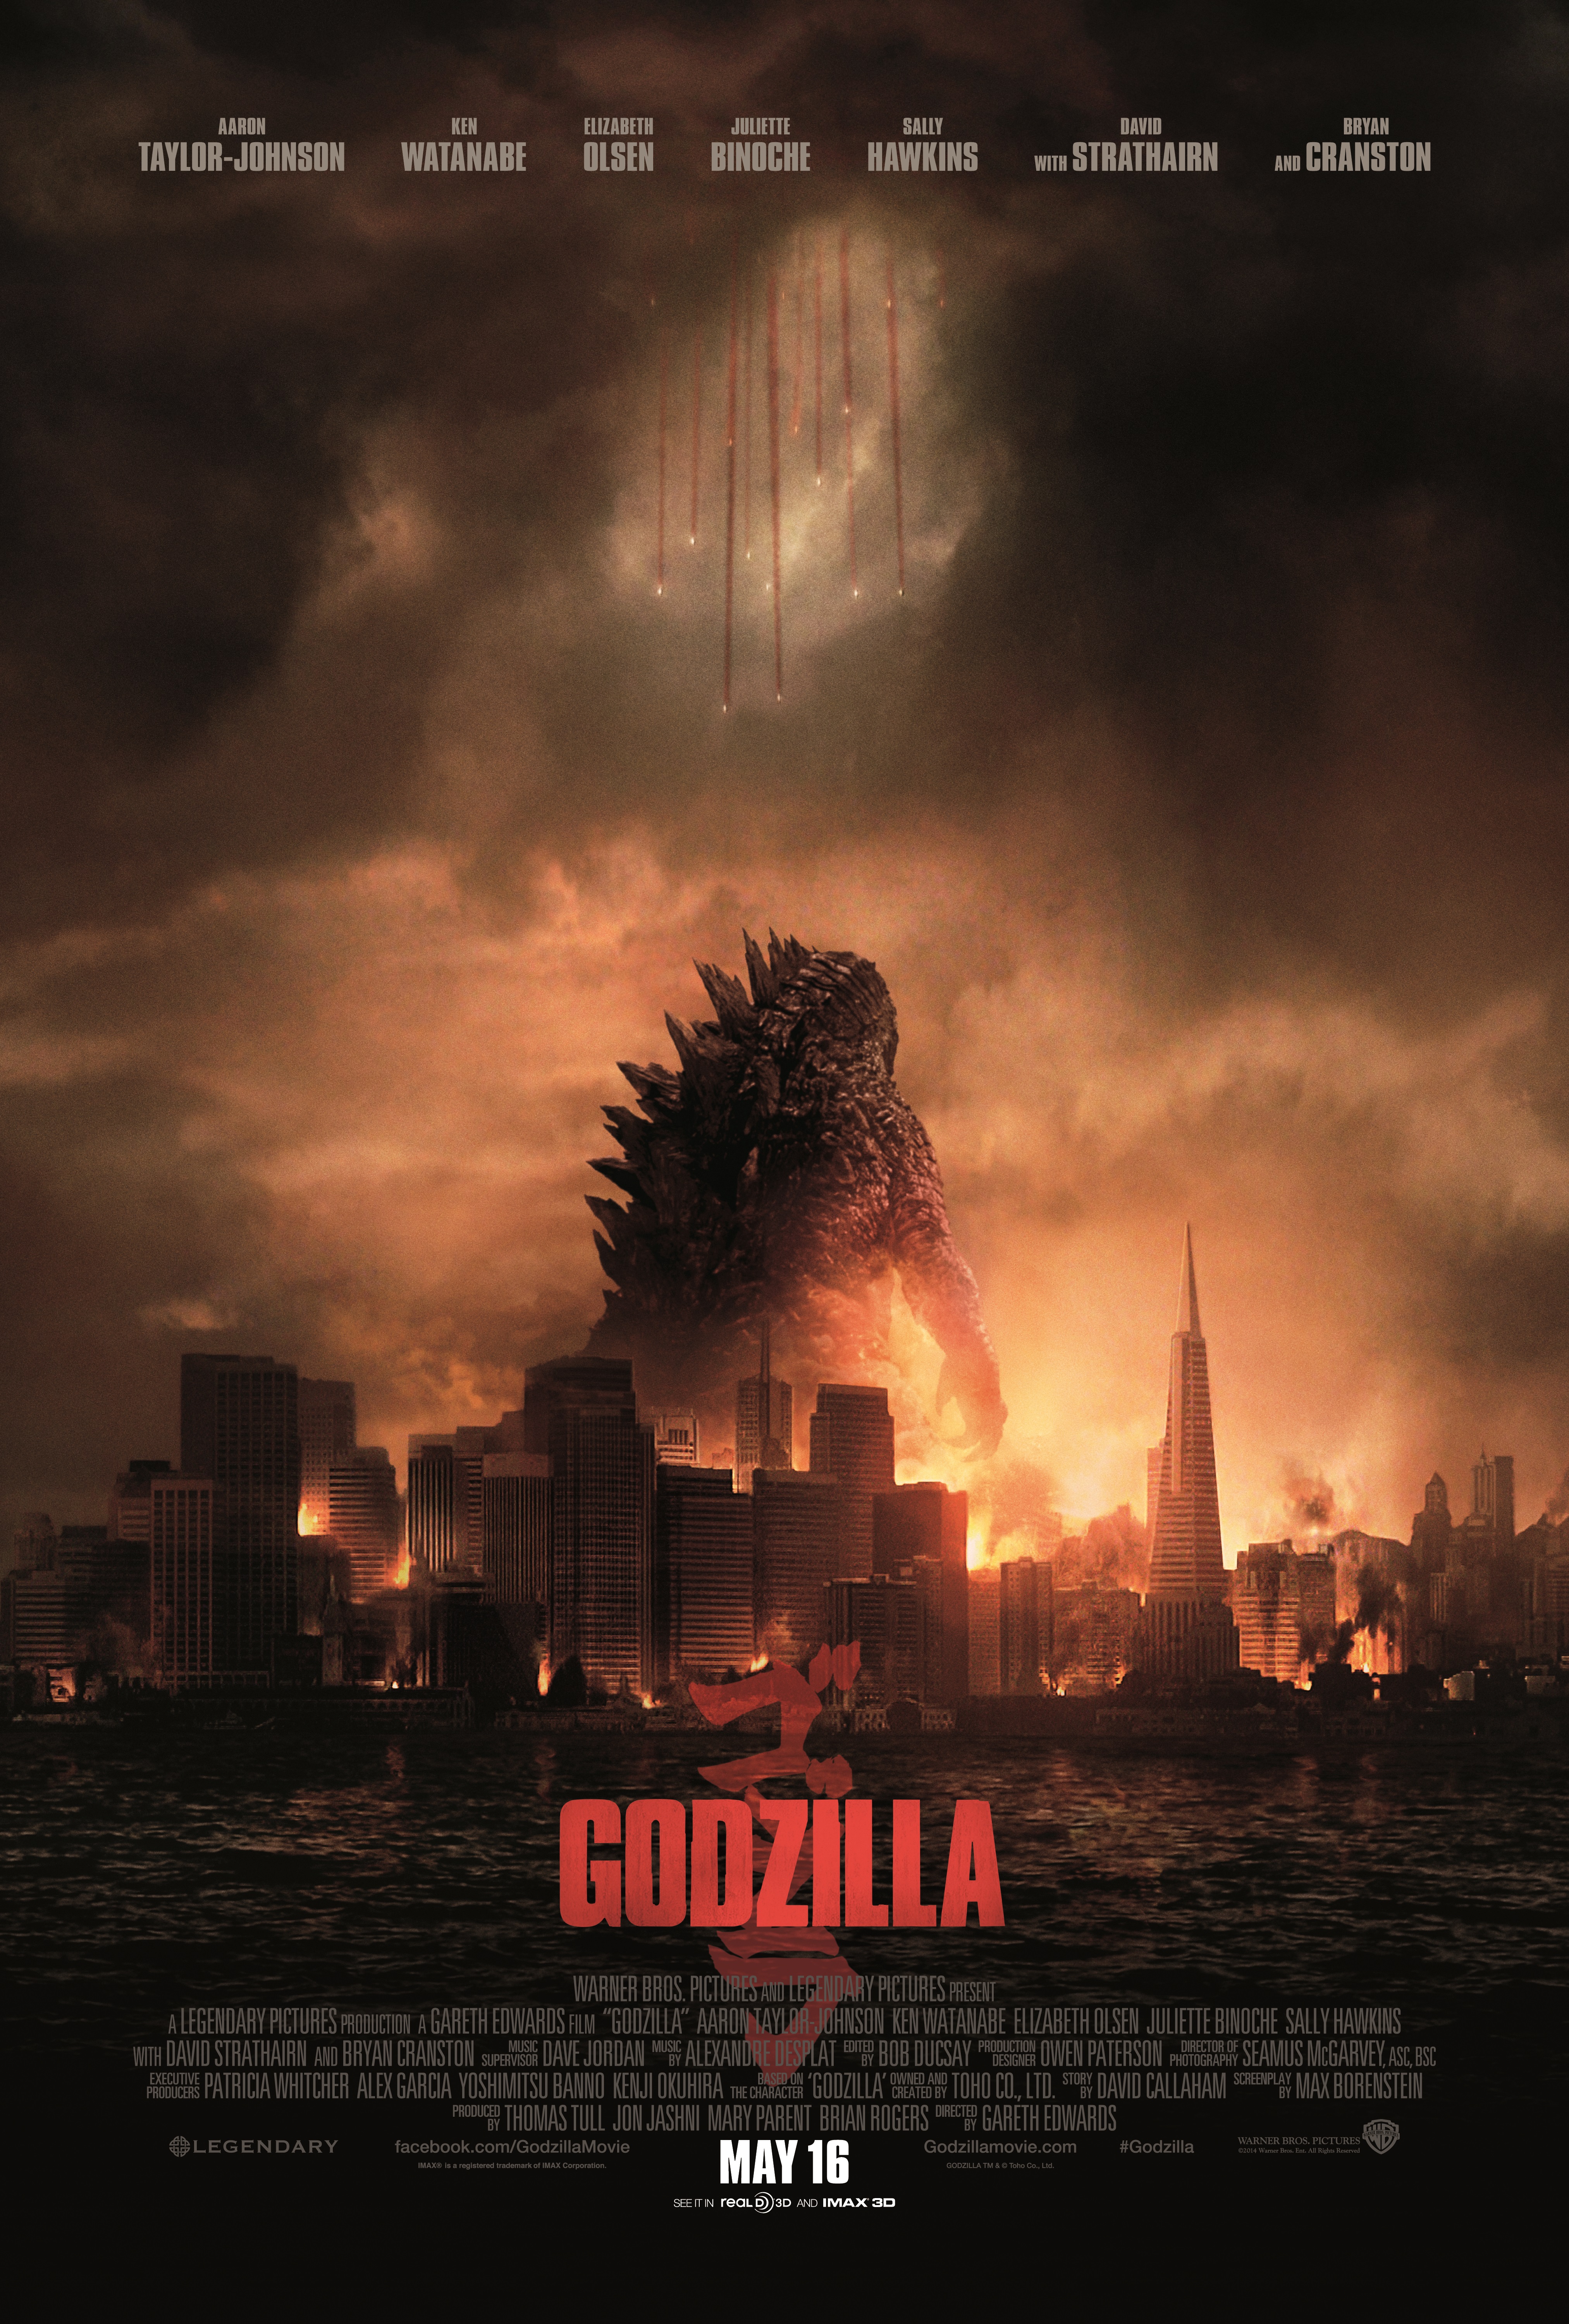 Godzilla Vs Kong (English) Movie Review: GODZILLA VS. KONG is laced with a  great story and build-up and the climax battle between the monsters is  amazing.